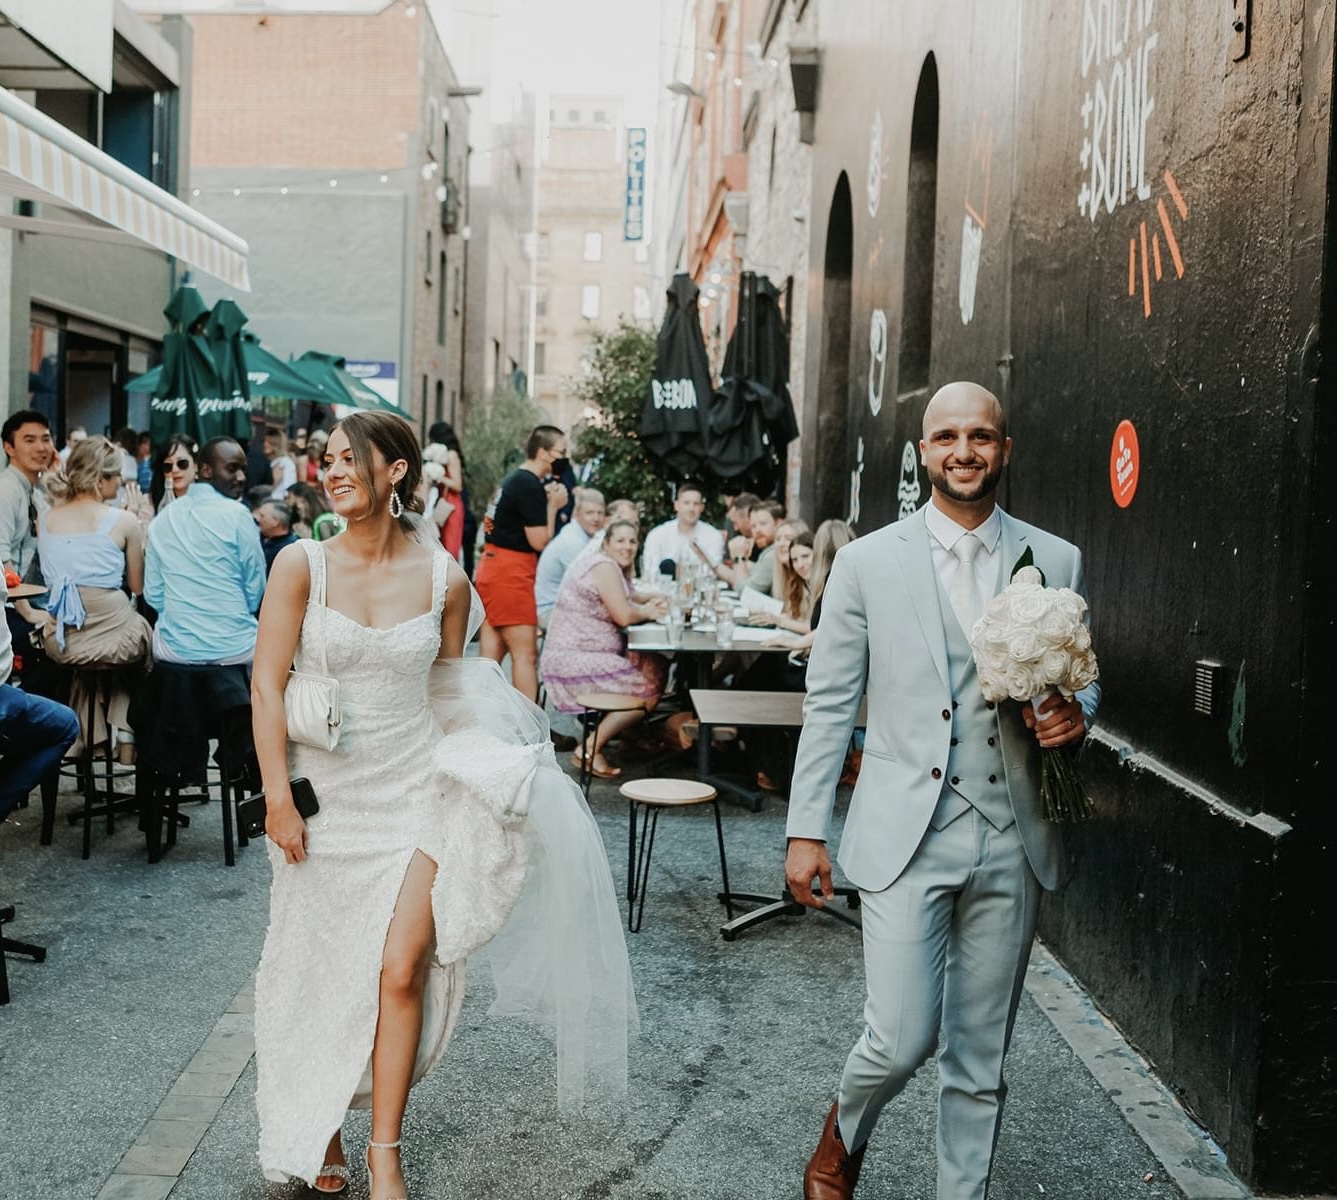 Cristiana and Jake walking down a busy city laneway smiling at onlookers